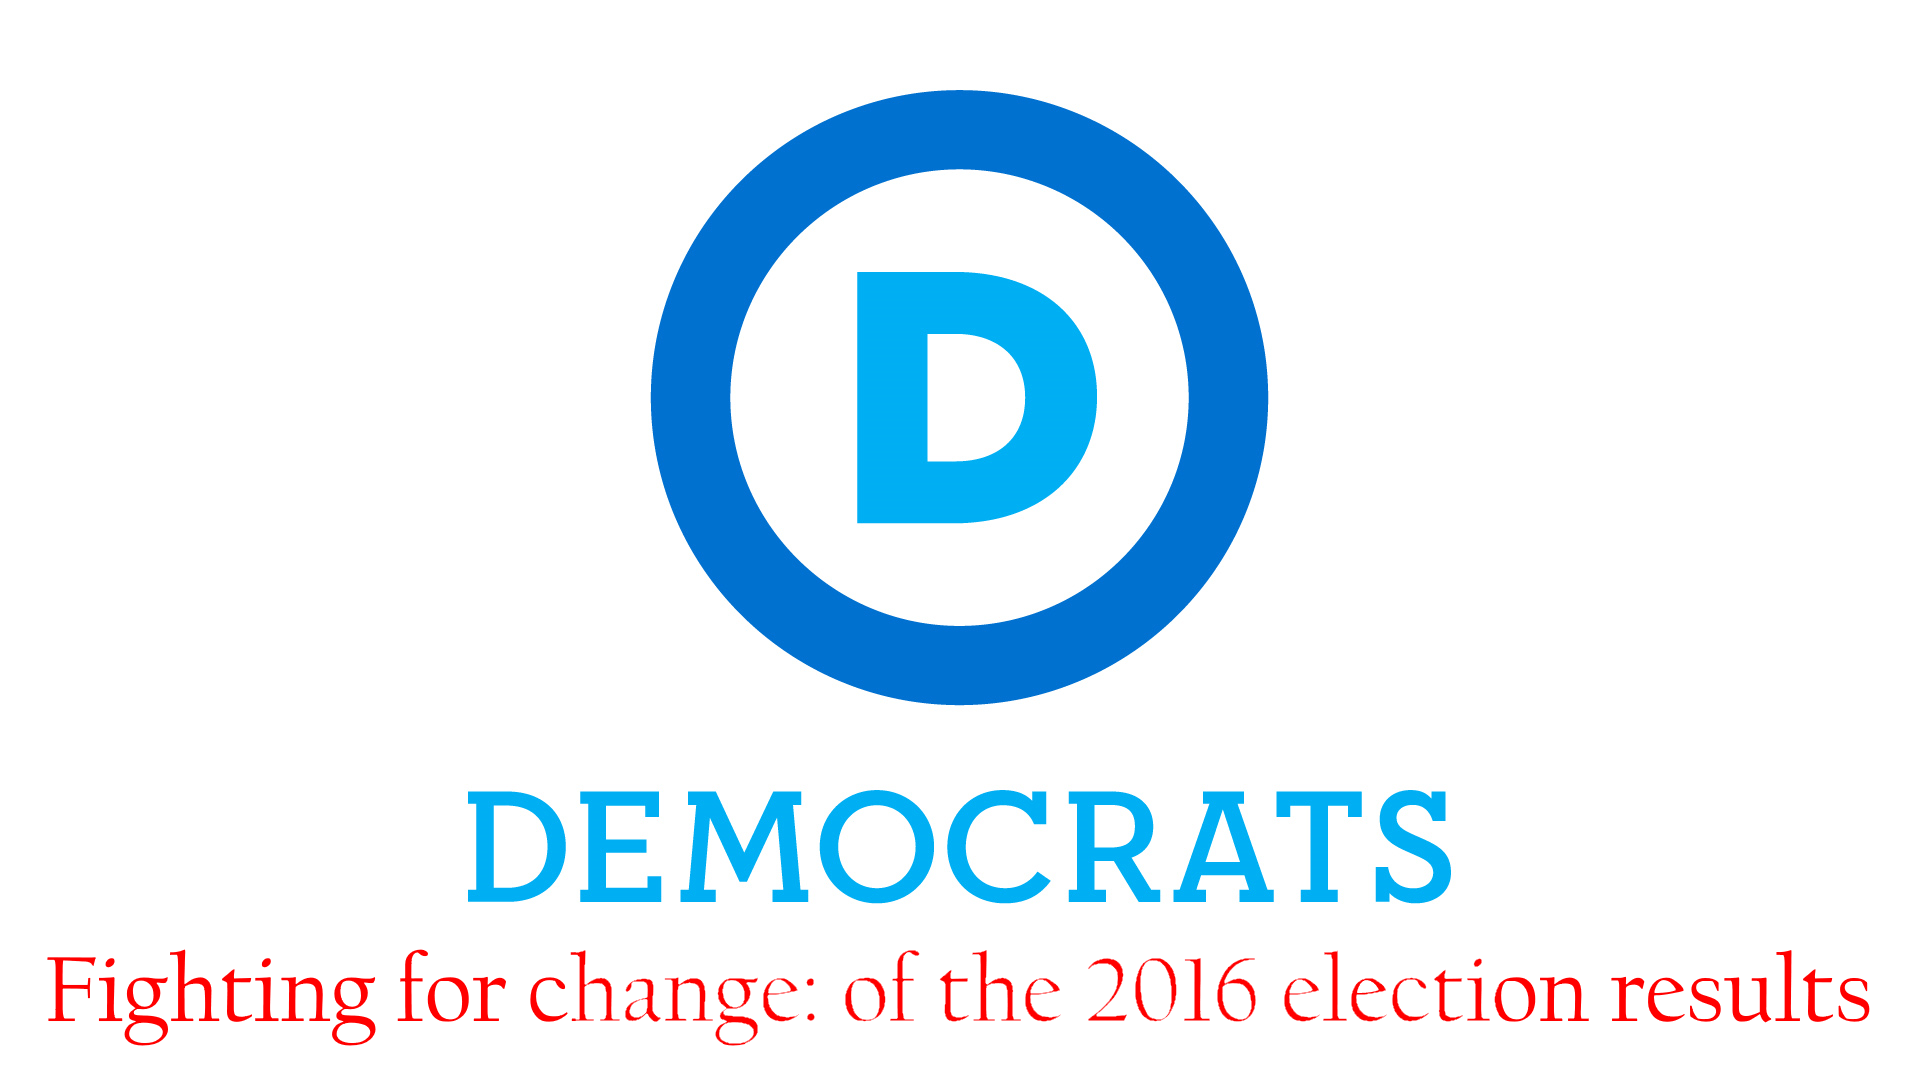 DNC Logo - BREAKING: The DNC has just put out their new logo for the 2020